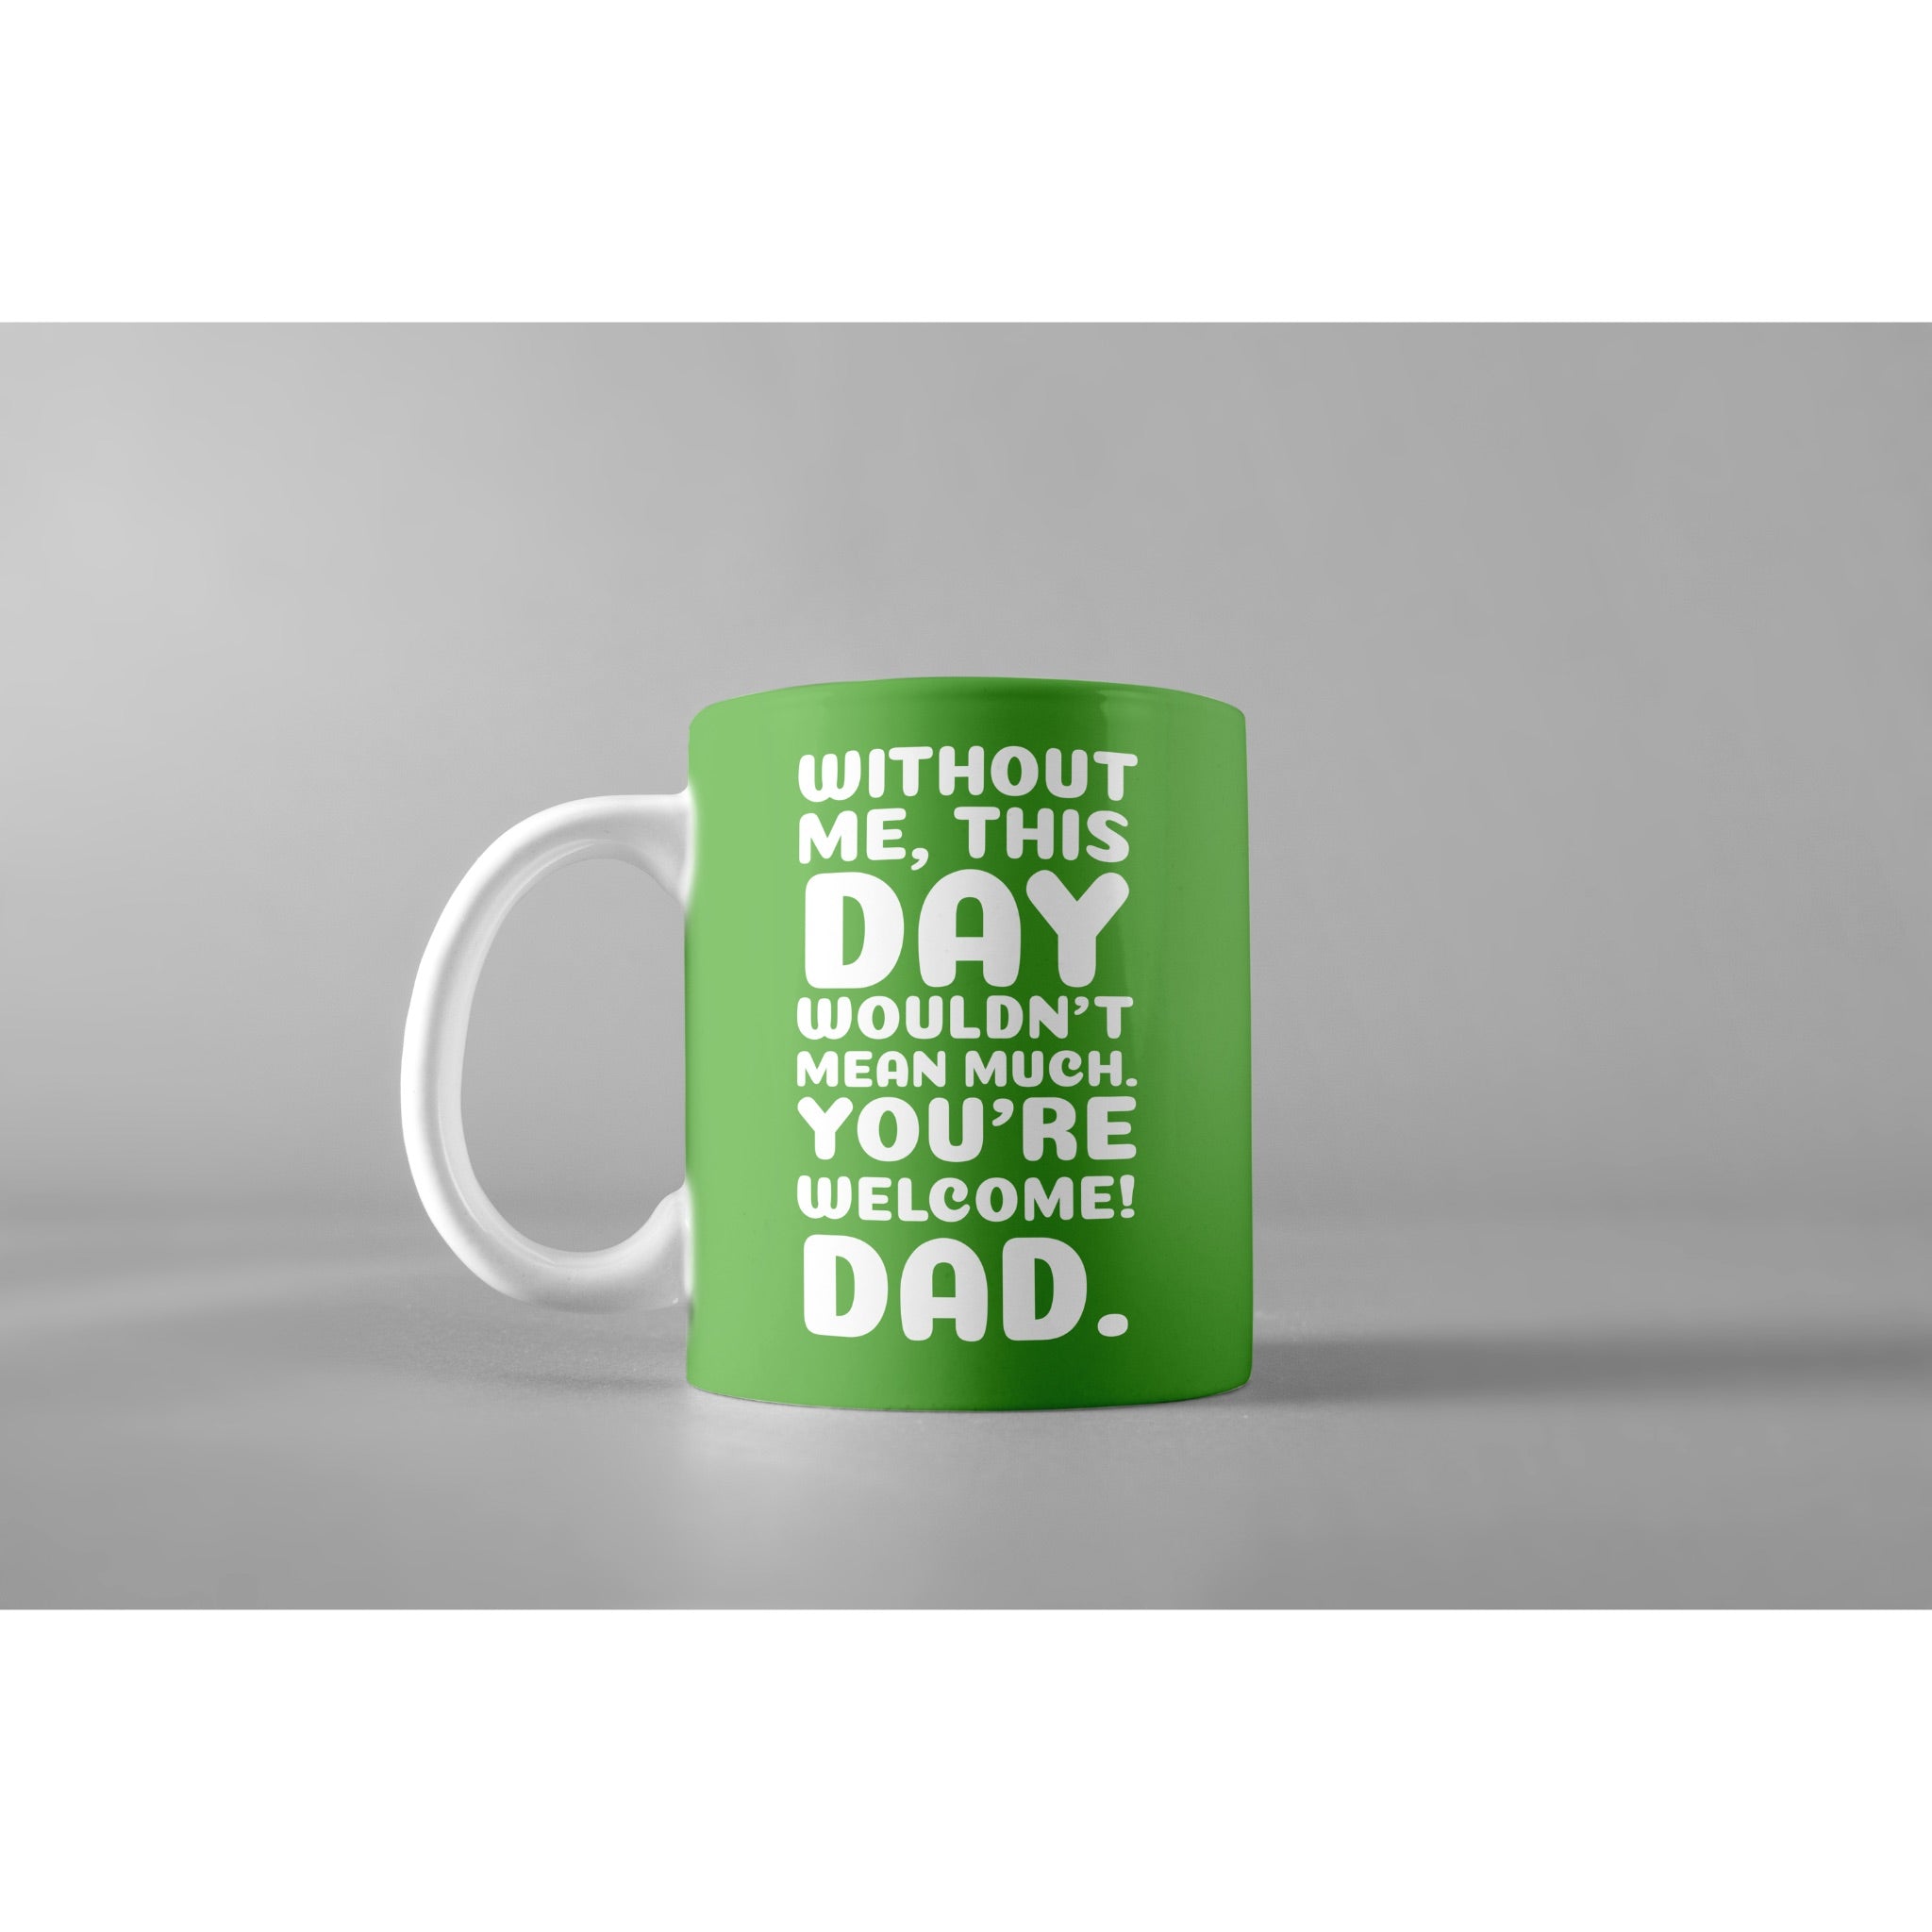 You're Welcome Dad- Mugs for Father